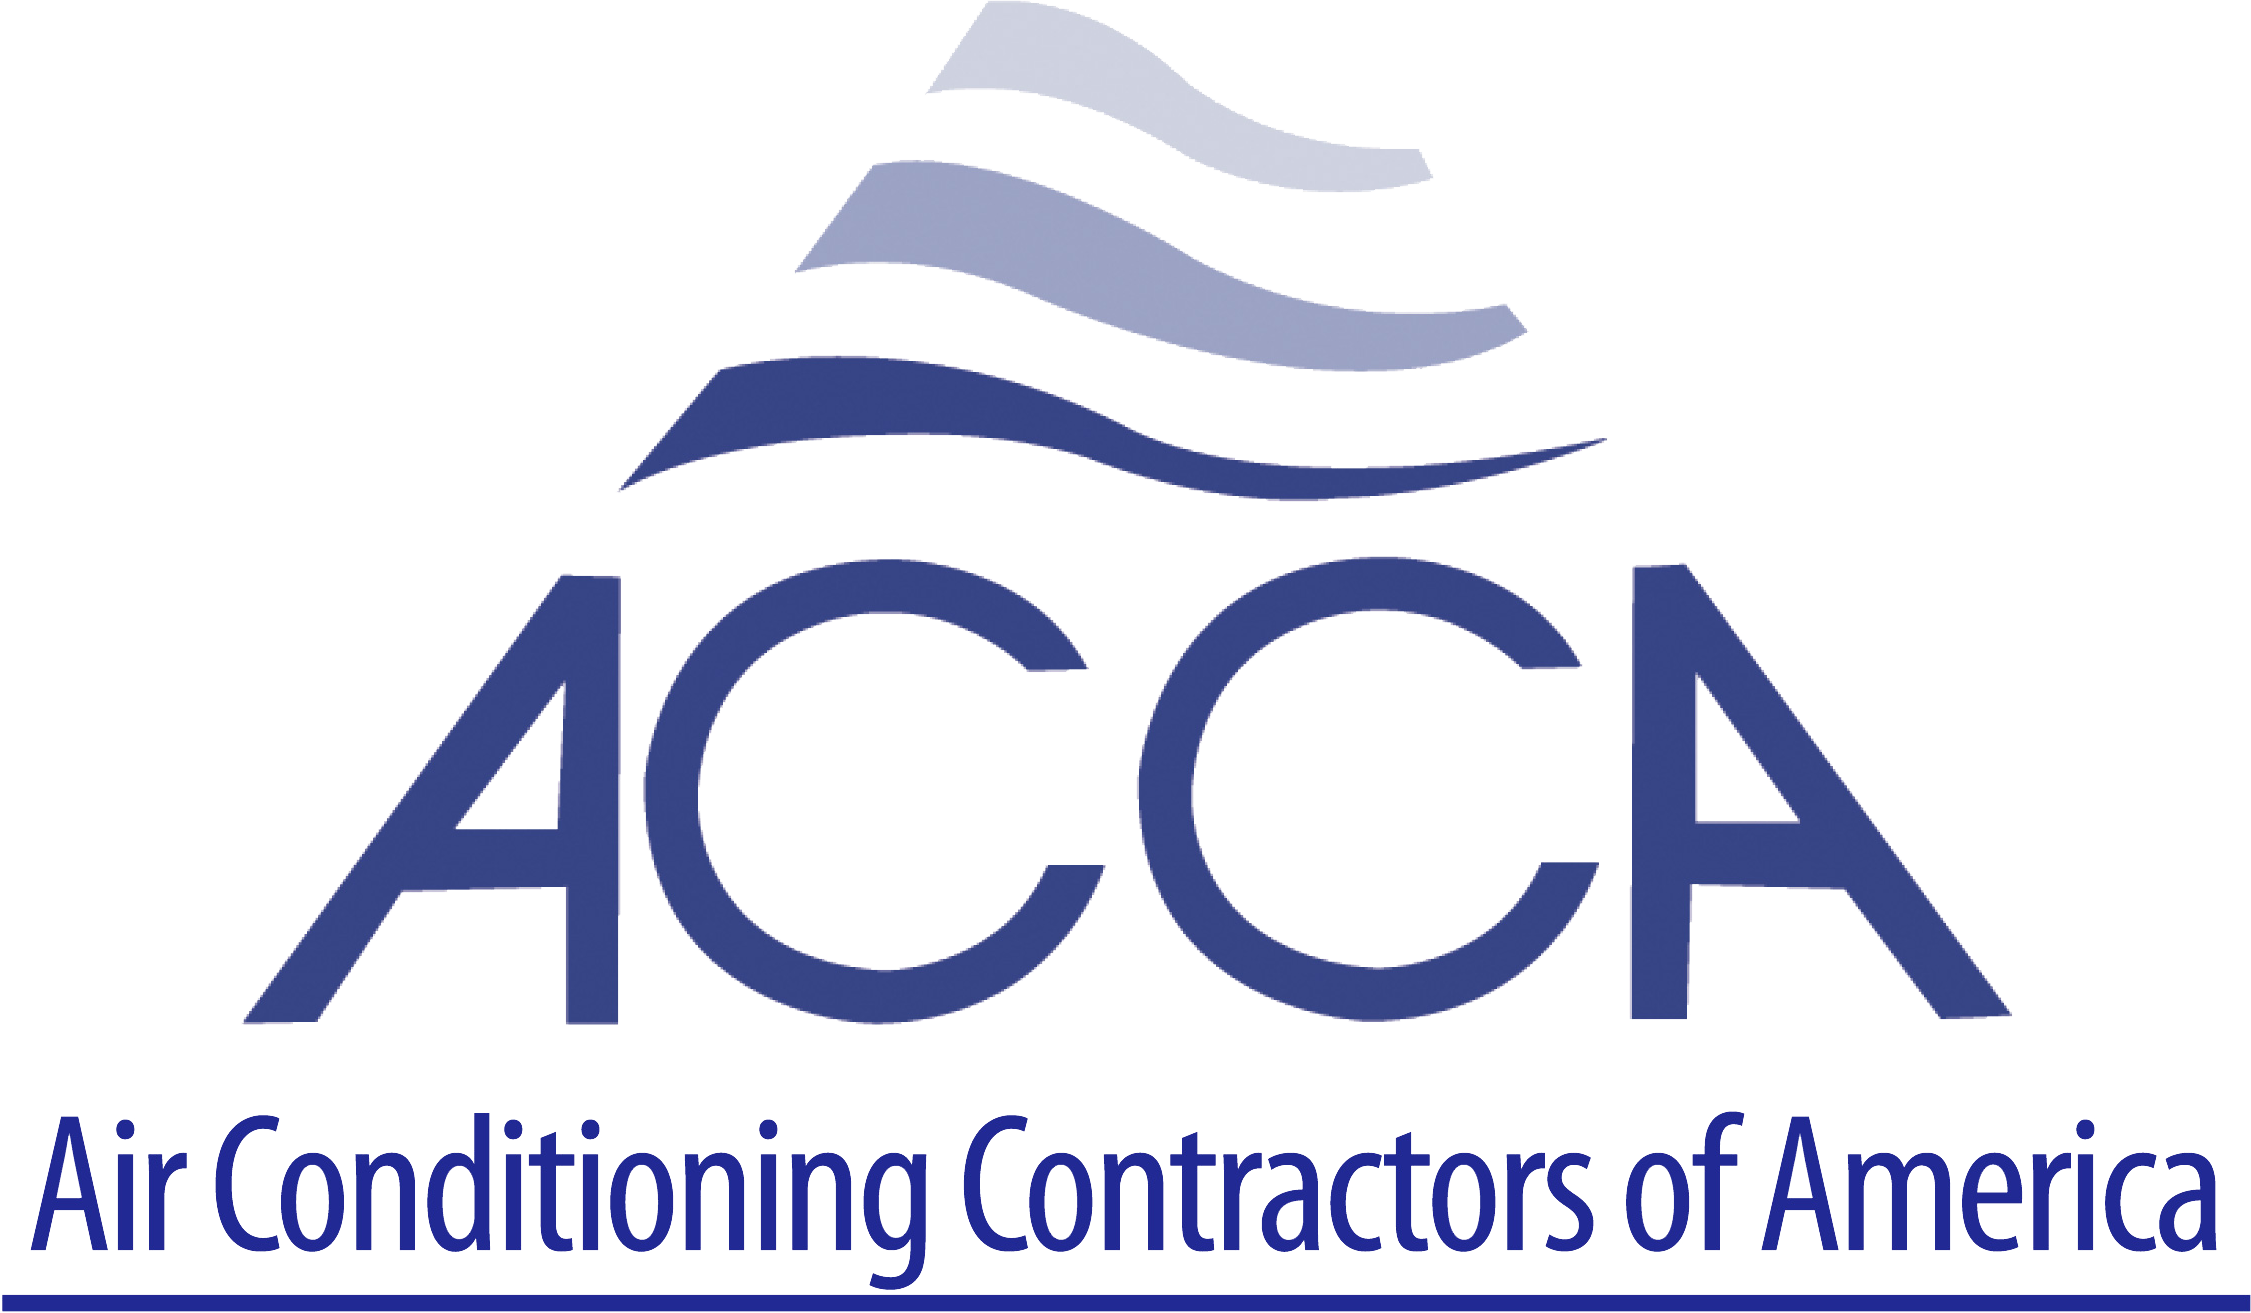 aloha new air conditioning contractor acca north lauderdale fl